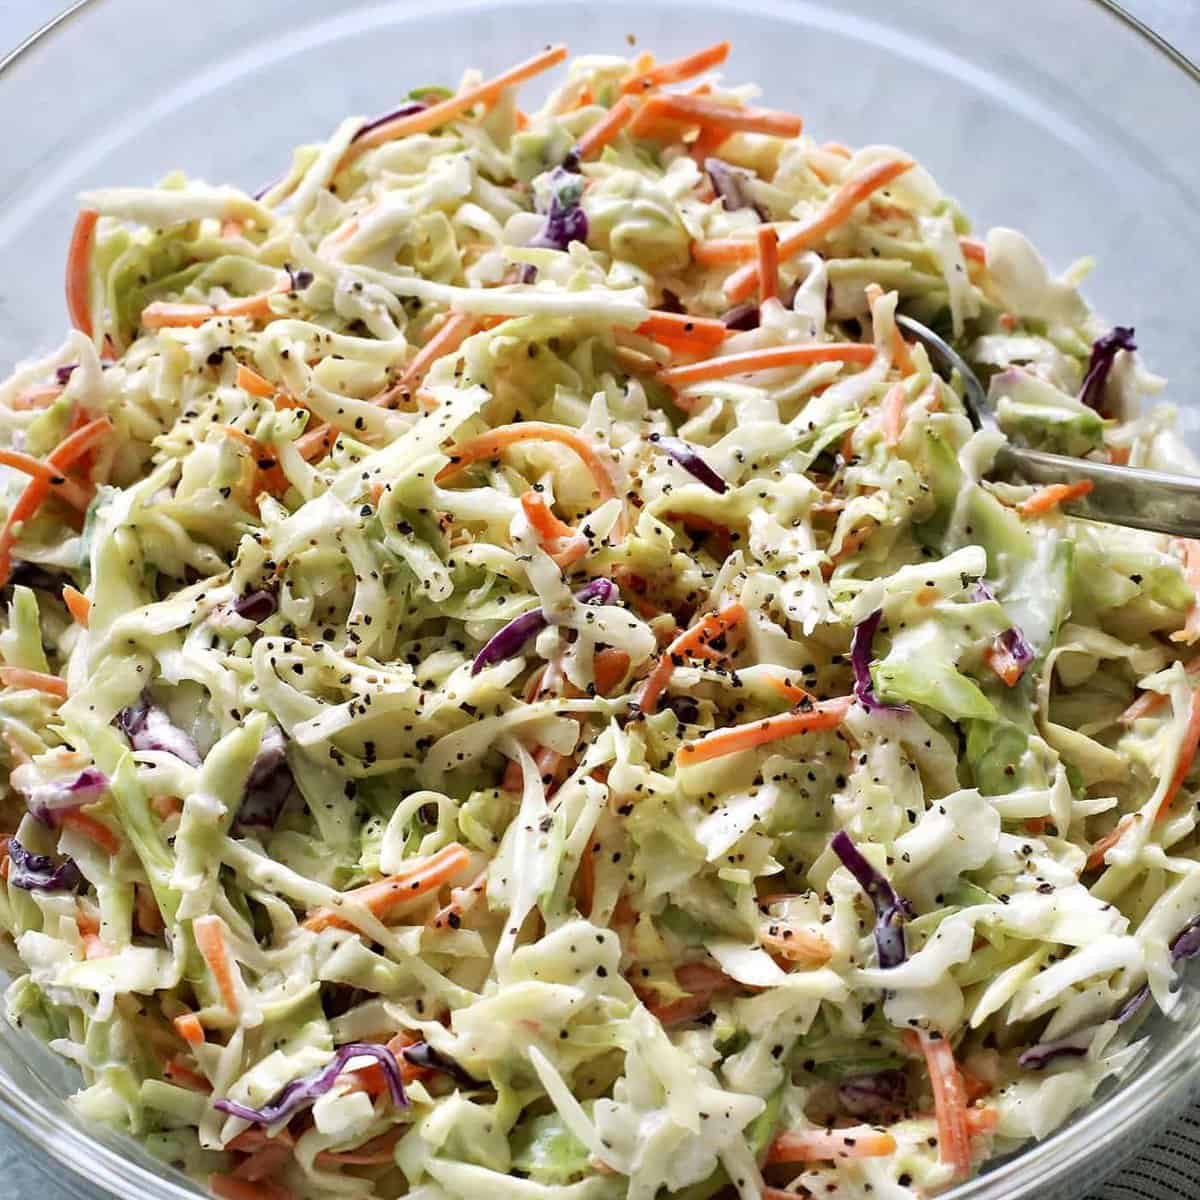  This salad is as refreshing as a dip in the pool on a hot summer day.